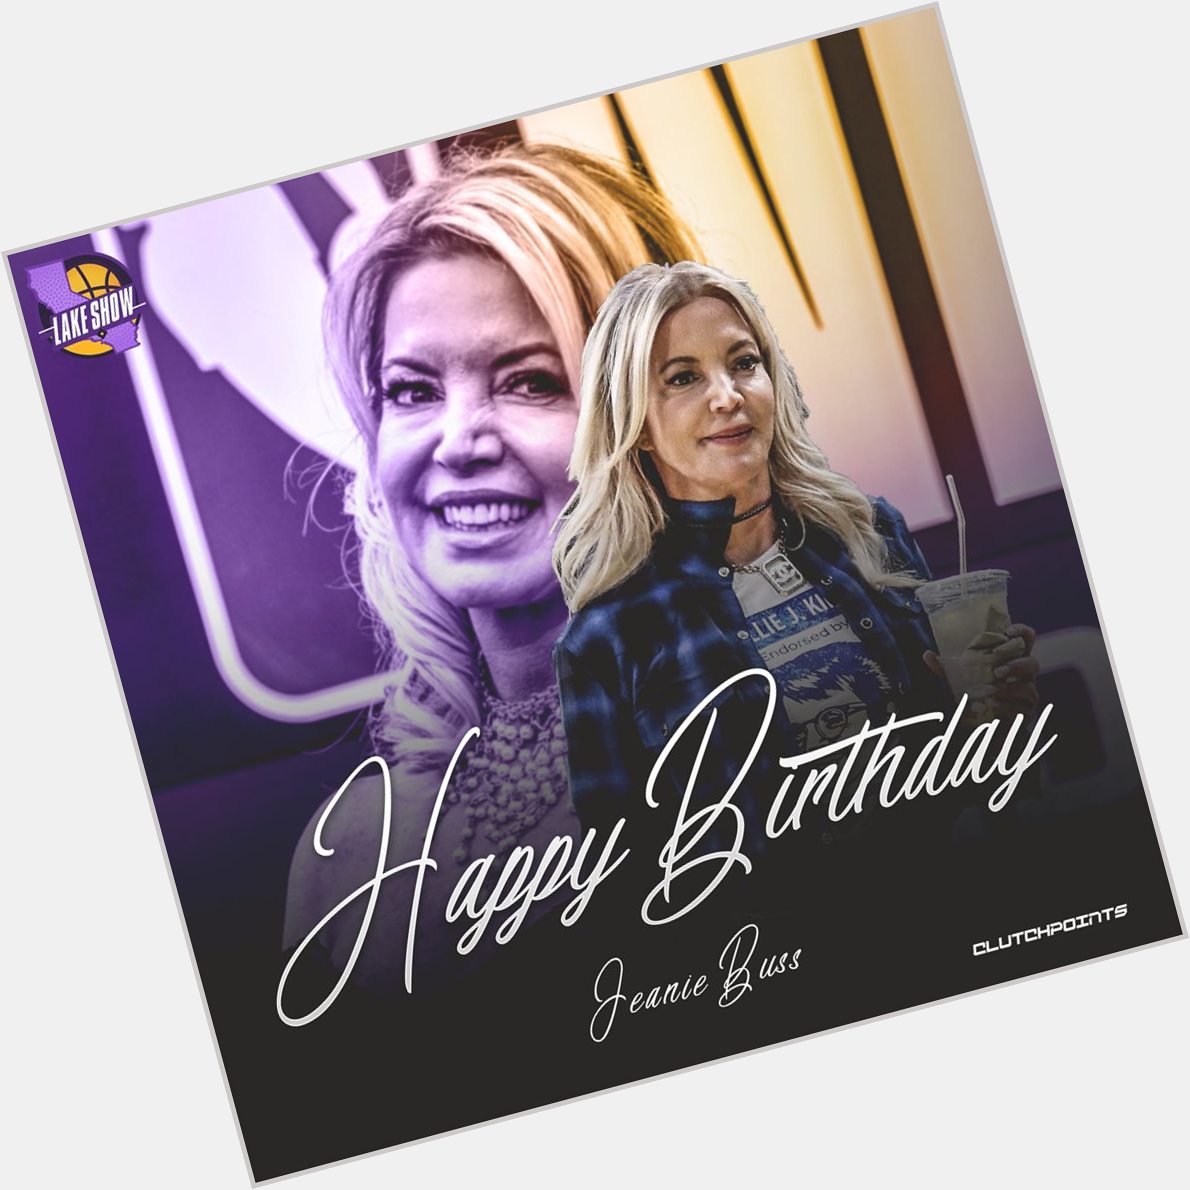 Join Lakeshow in wishing Lakers owner and president, Jeanie Buss, a happy 58th birthday!    